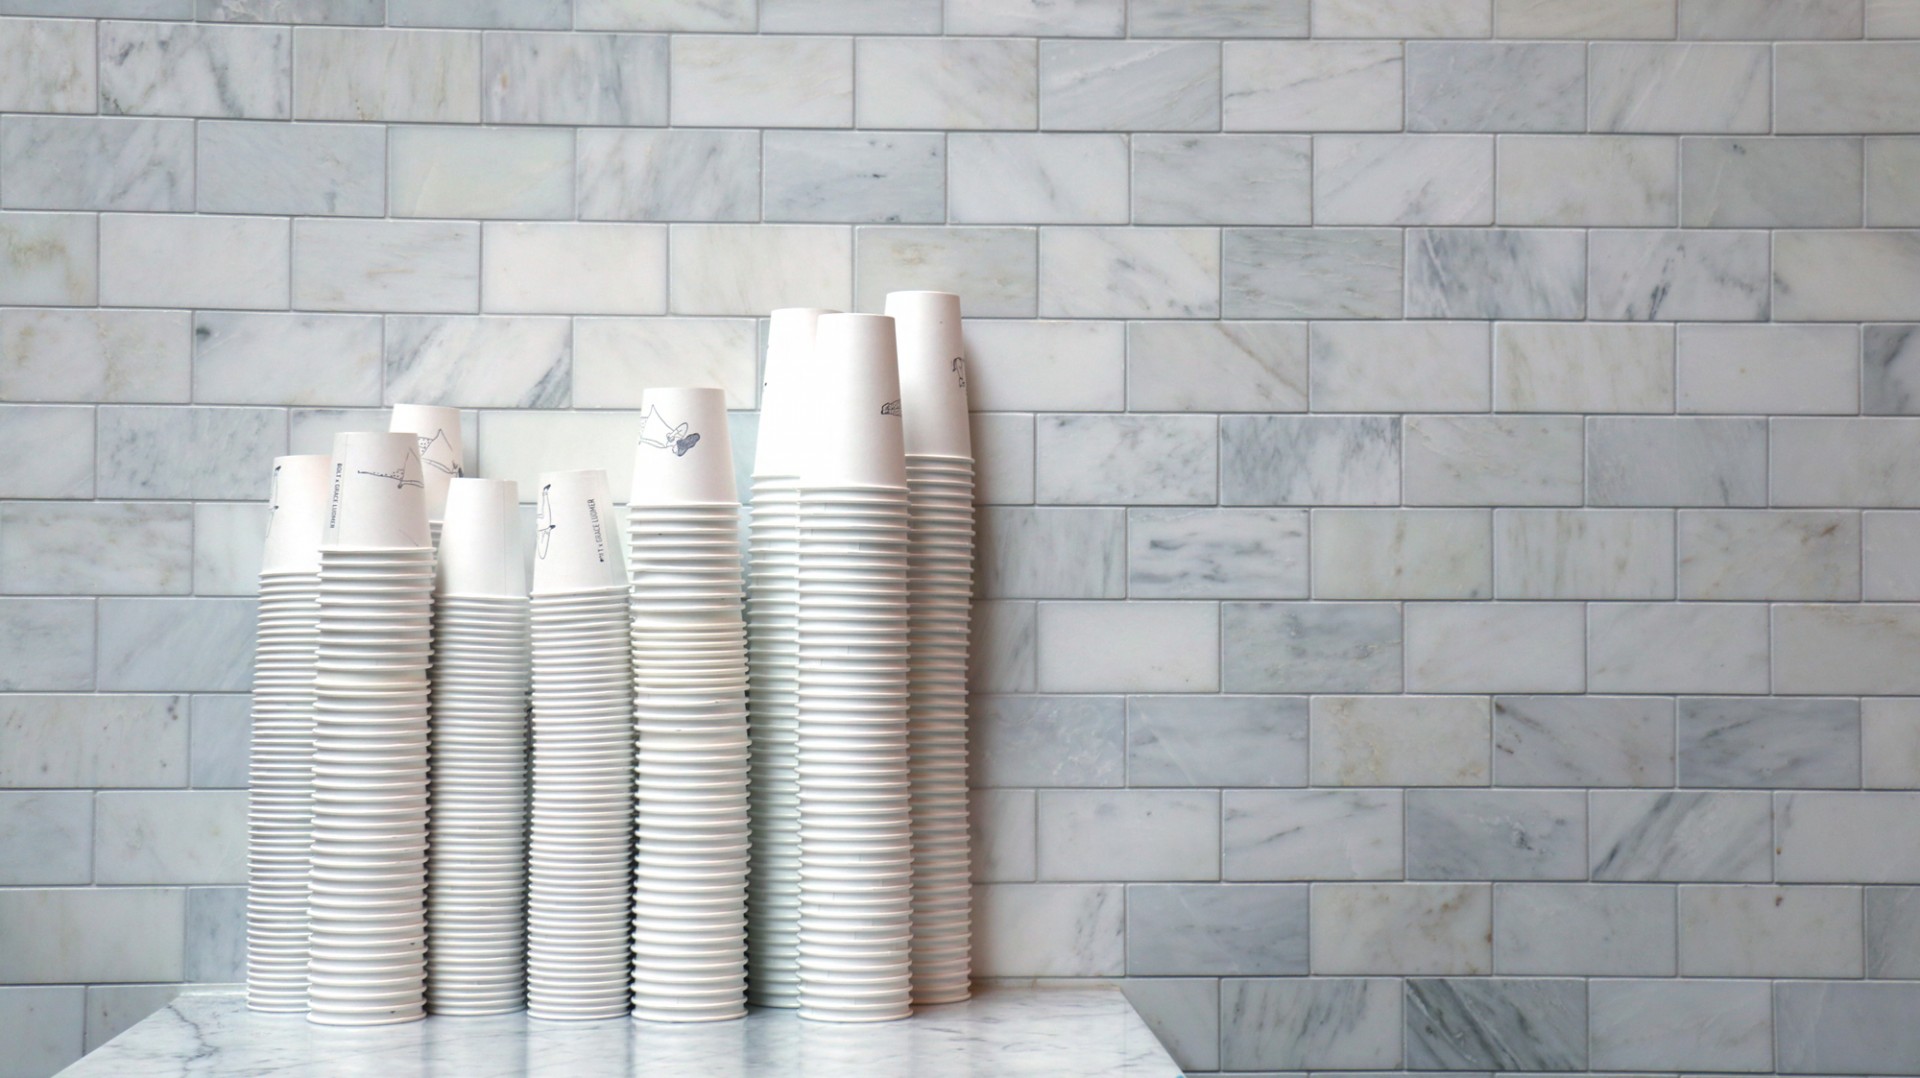 Stacks of coffee cups